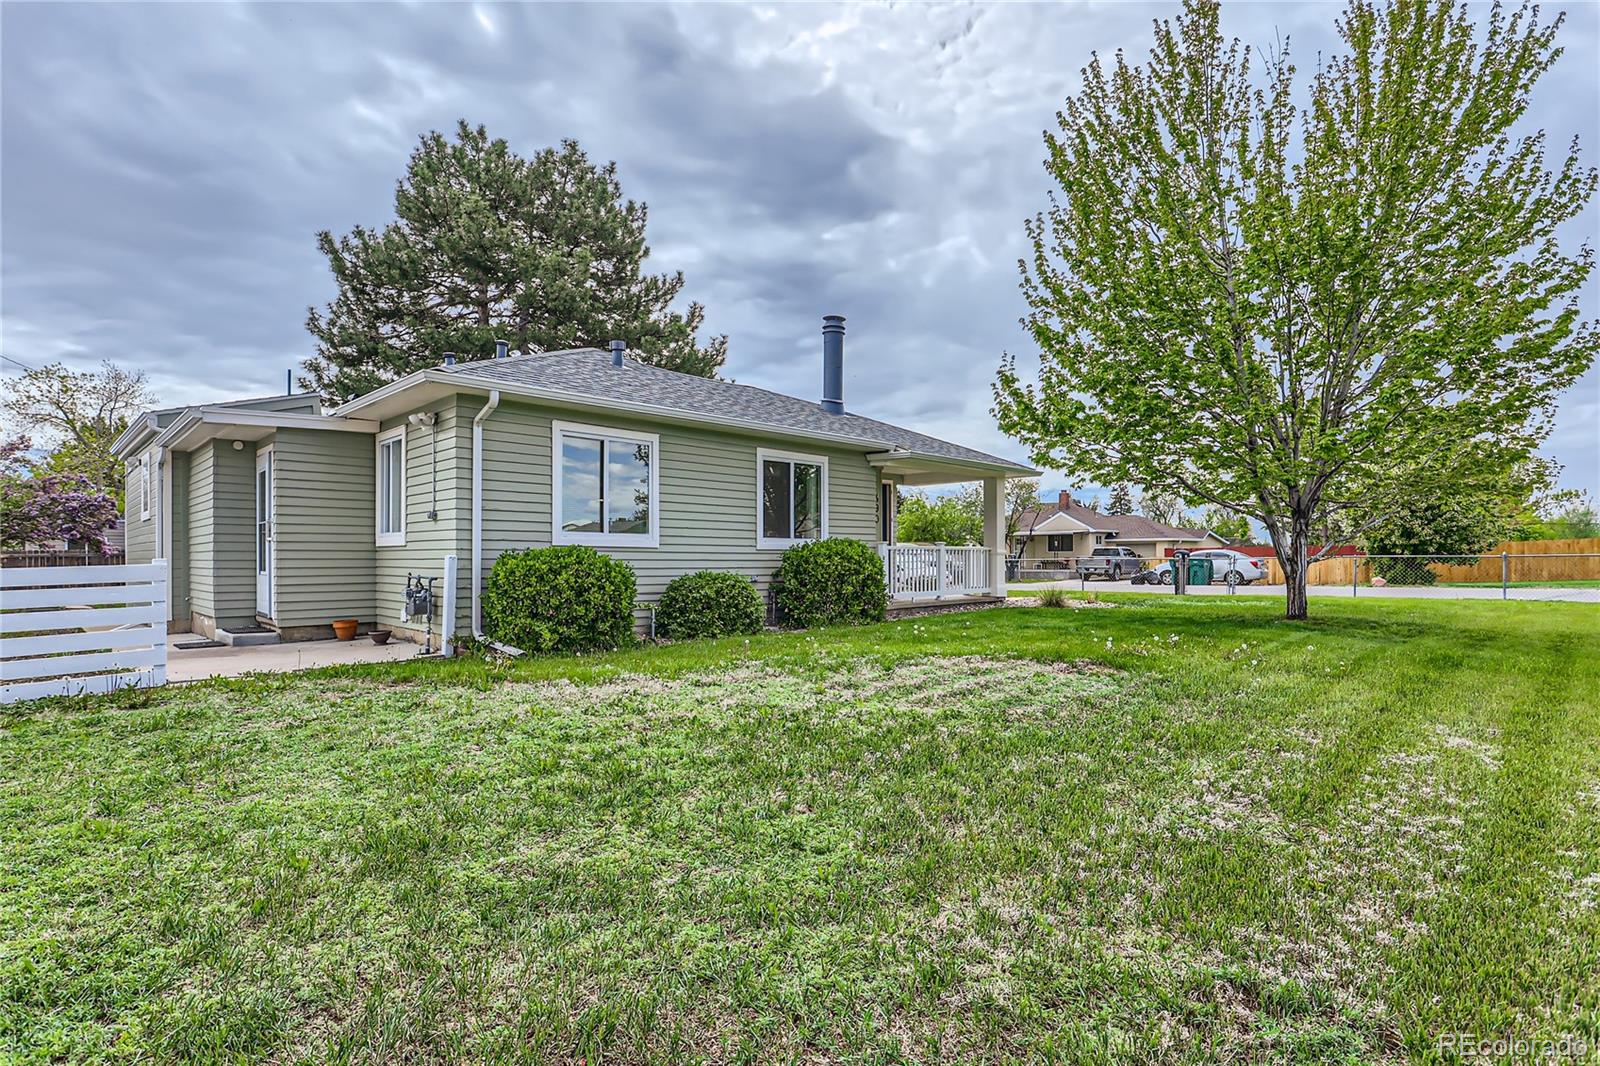 Report Image for 490 S Kendall Street,Lakewood, Colorado